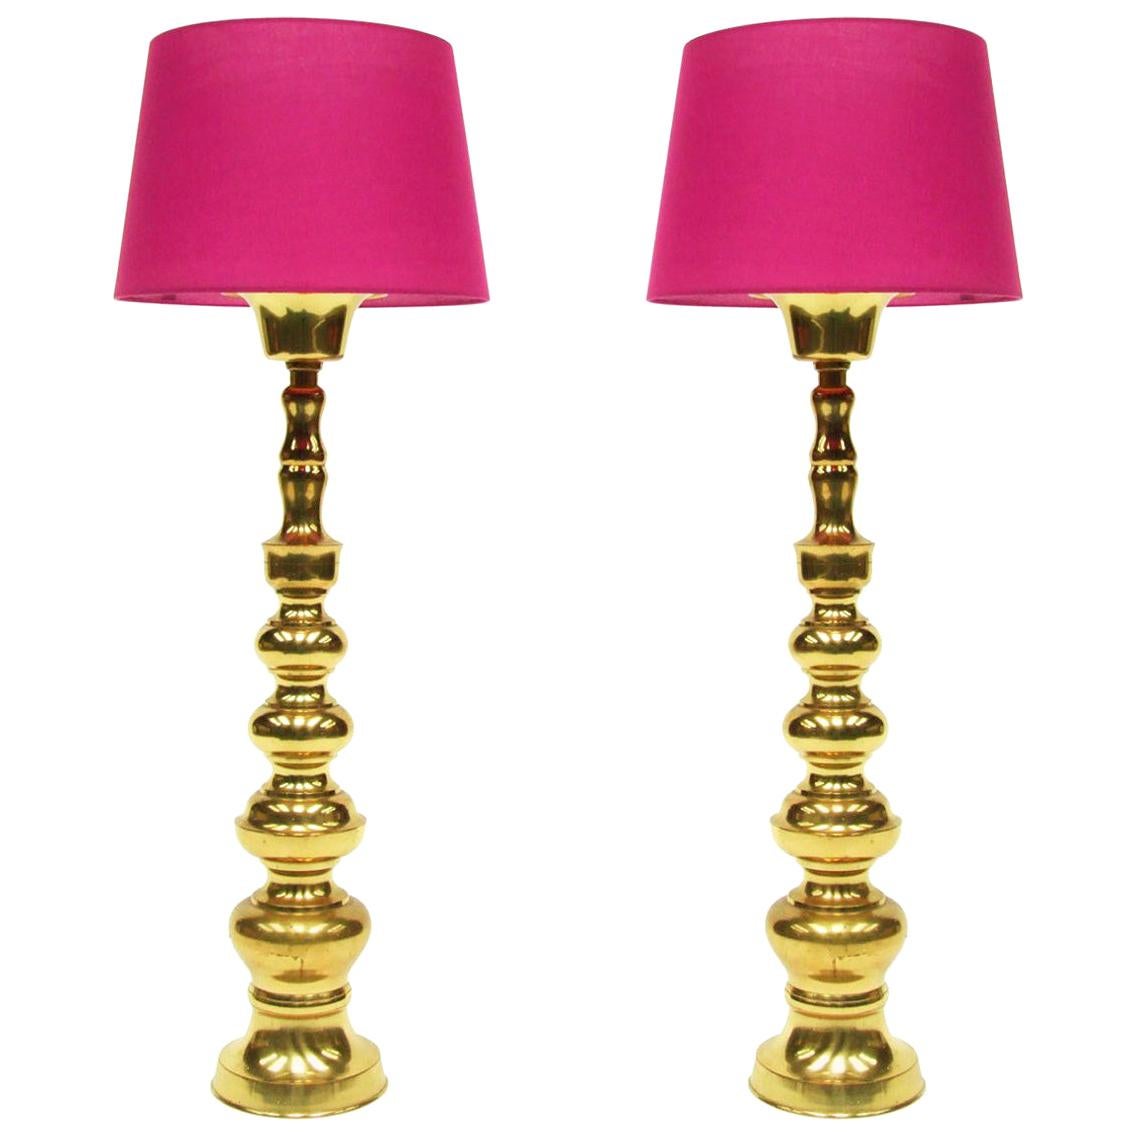 Pair of Large 1970s Brass Stiffel Floor or Table Lamps